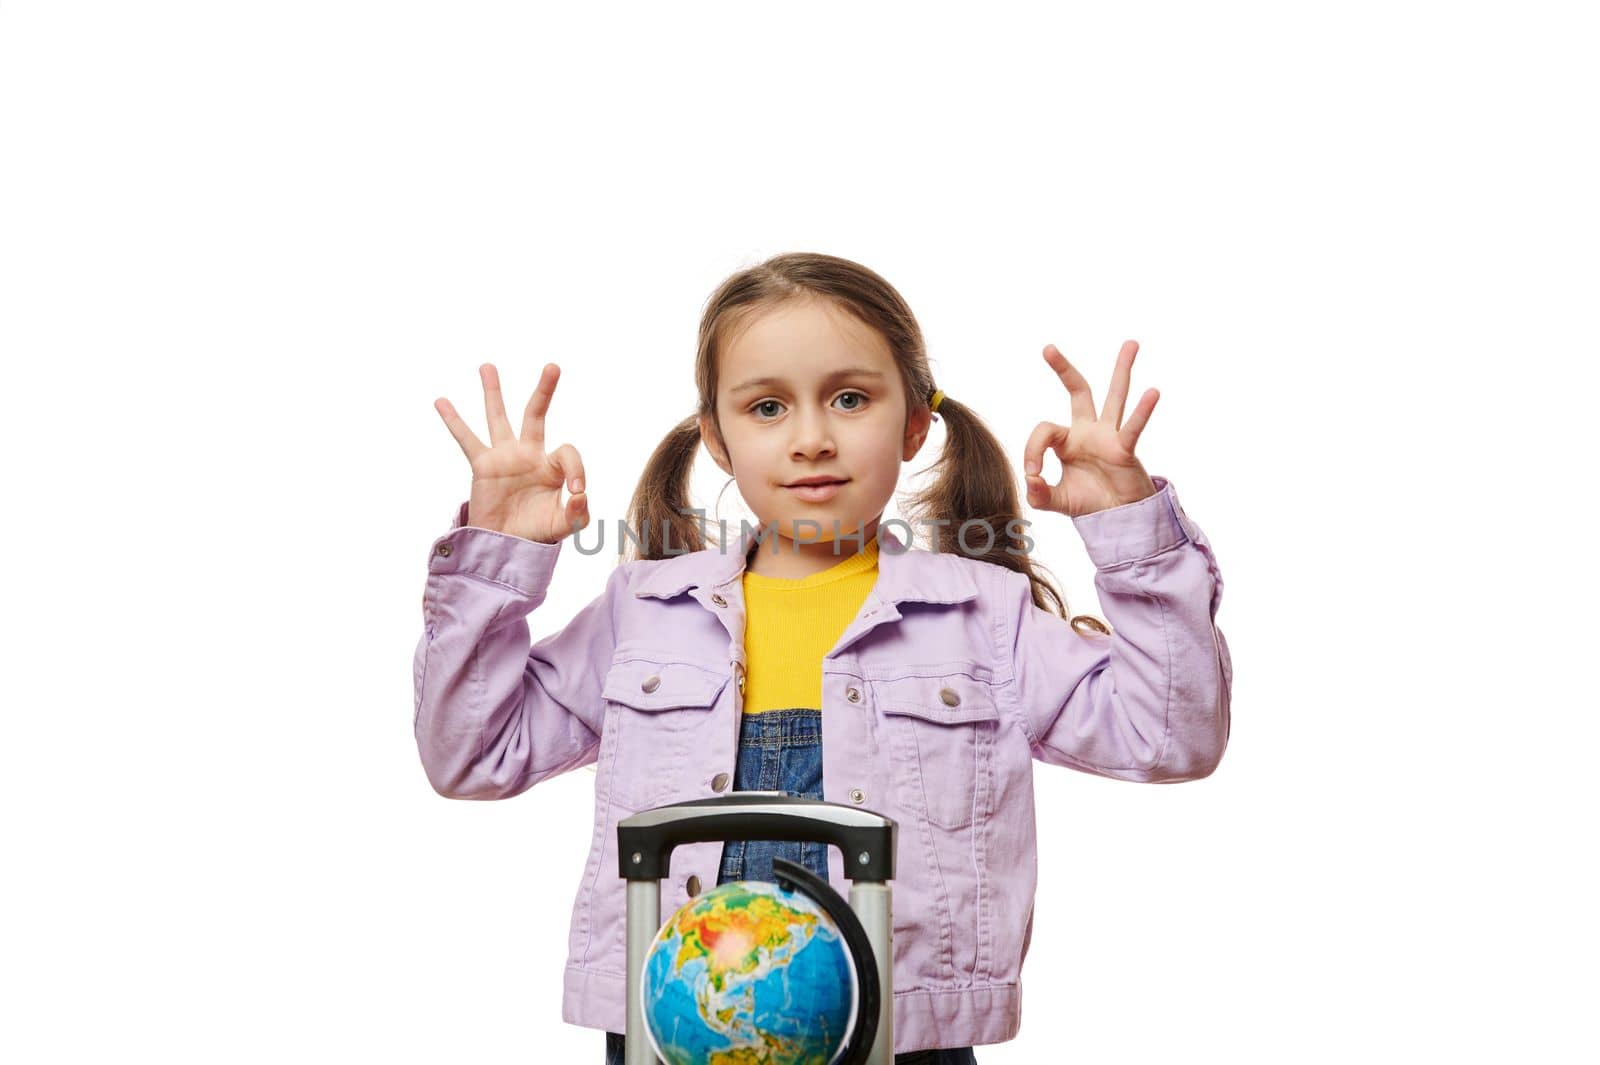 Adorable little traveler girl with two ponytails, standing next to the globe on yellow suitcase baggage, gesturing with hands, demonstrating OK sign looking at camera, isolated on white background